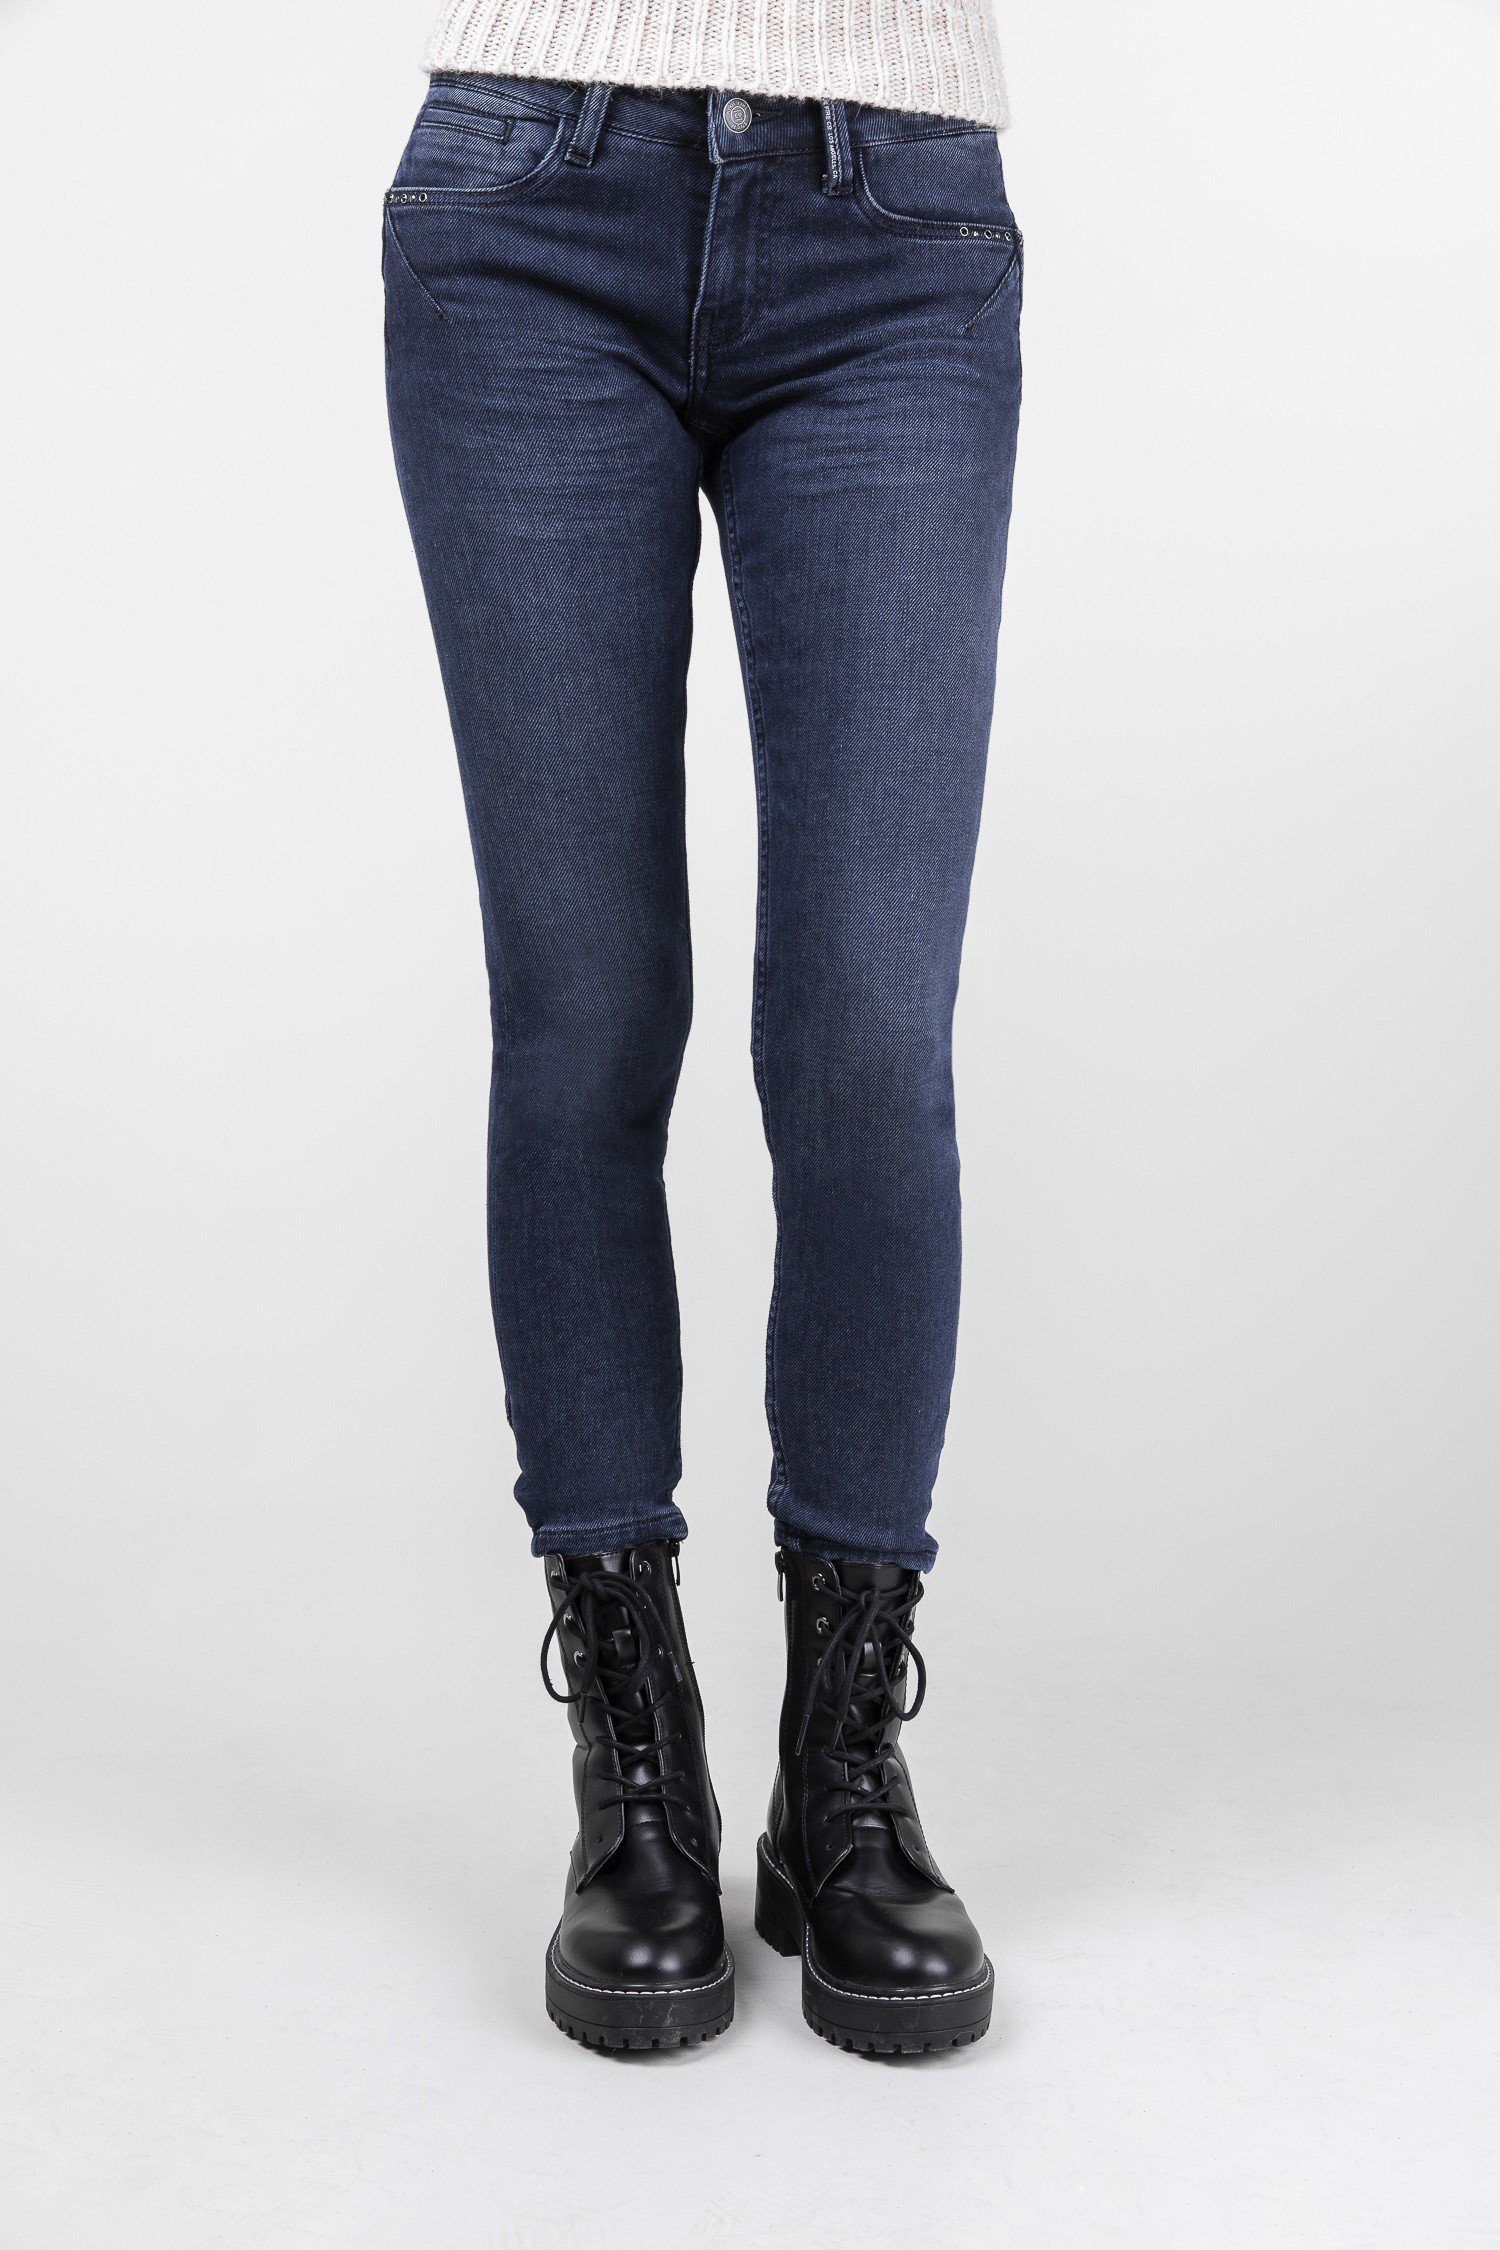 BLUE FIRE Stretch-Jeans BLUE FIRE ALICIA blue shadow 1044.2176 | Stretchjeans